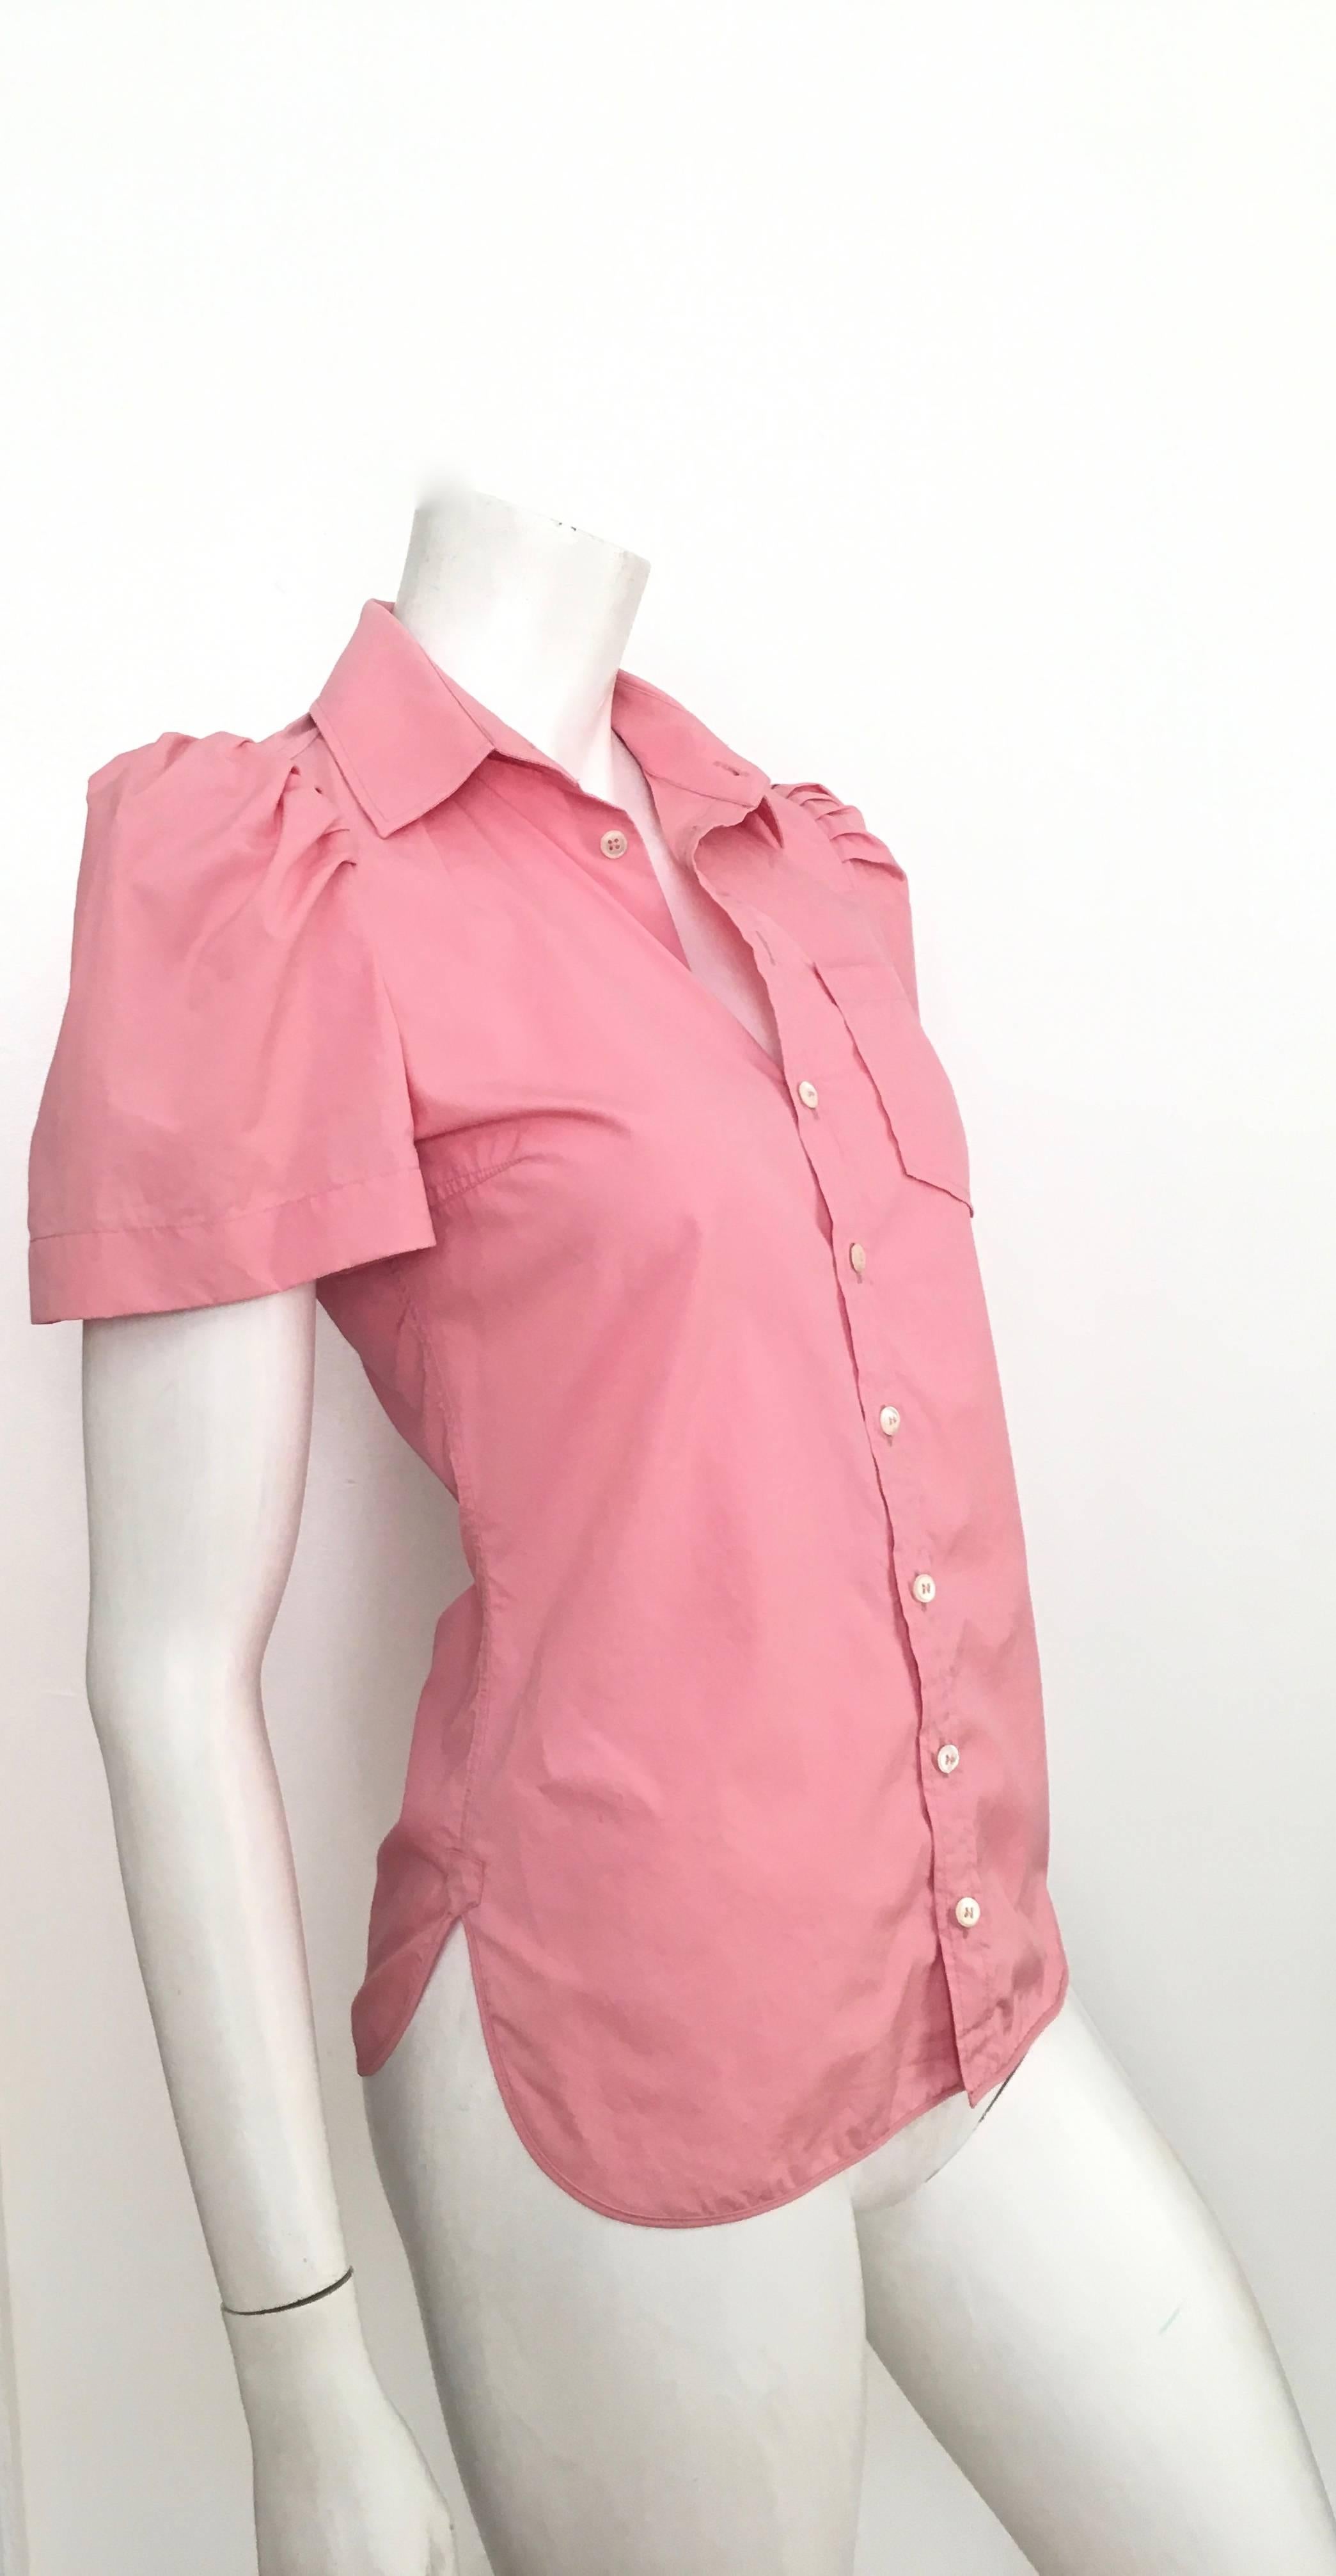 Balenciaga pink cotton poof short sleeve button up blouse is an USA size 4. This fits Matilda the Mannequin just perfectly, so if your body type is identical to Matilda then it's a win win.  
Measurements are:
34-1/2" bust 87cm
10" sleeves